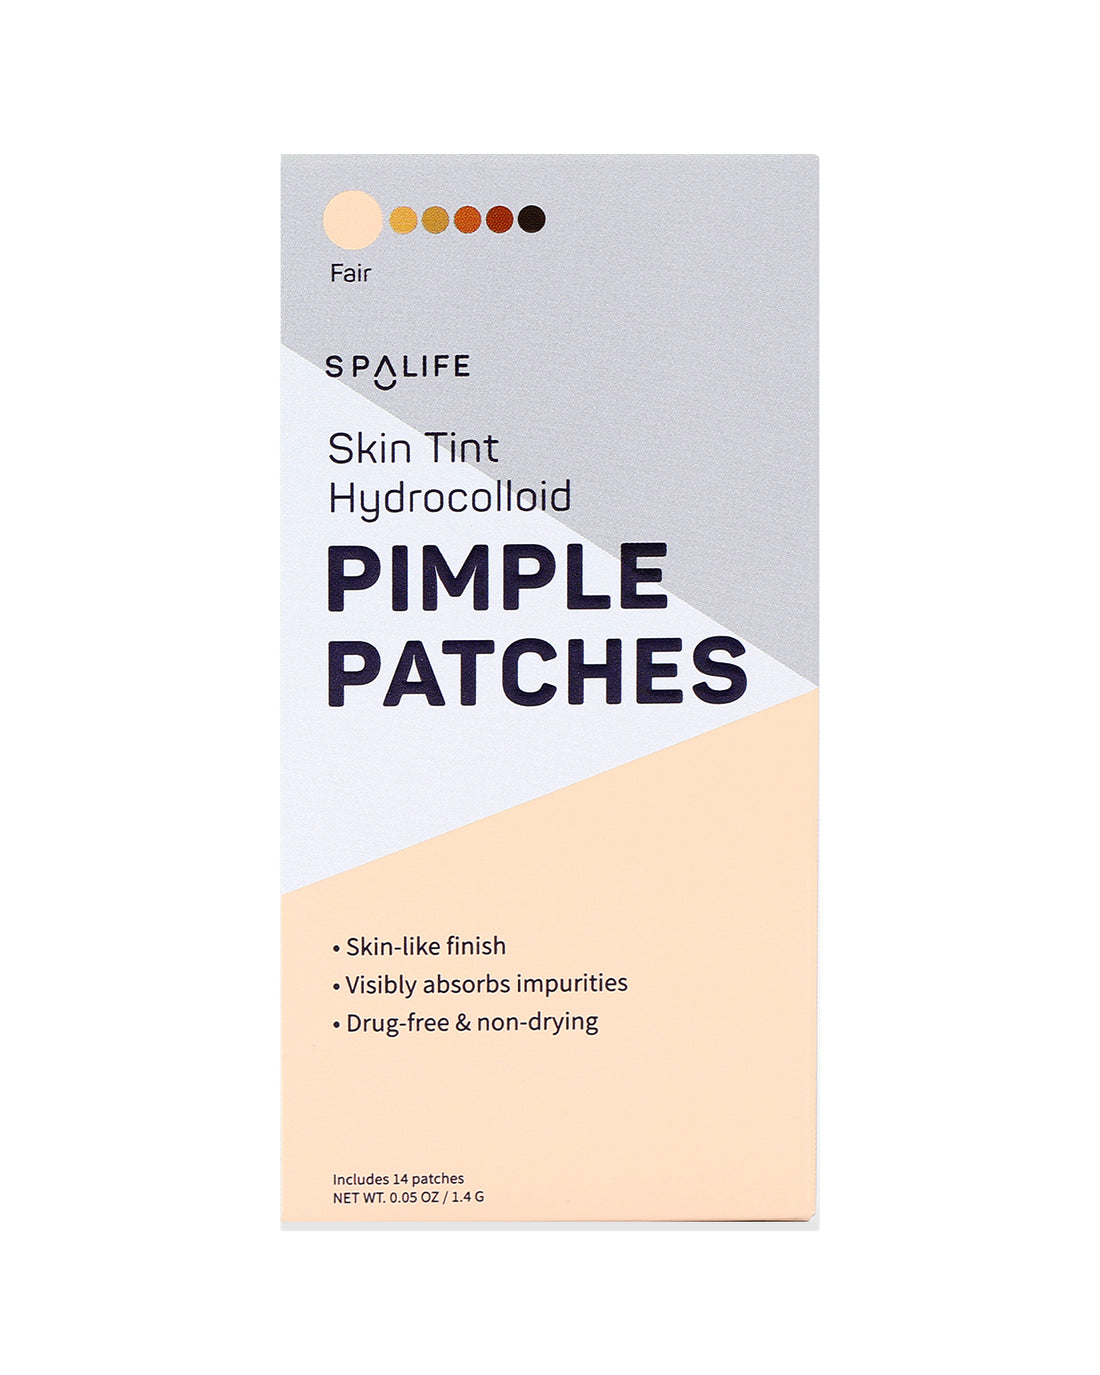 Skin_tint_pimple_patches_packe-661